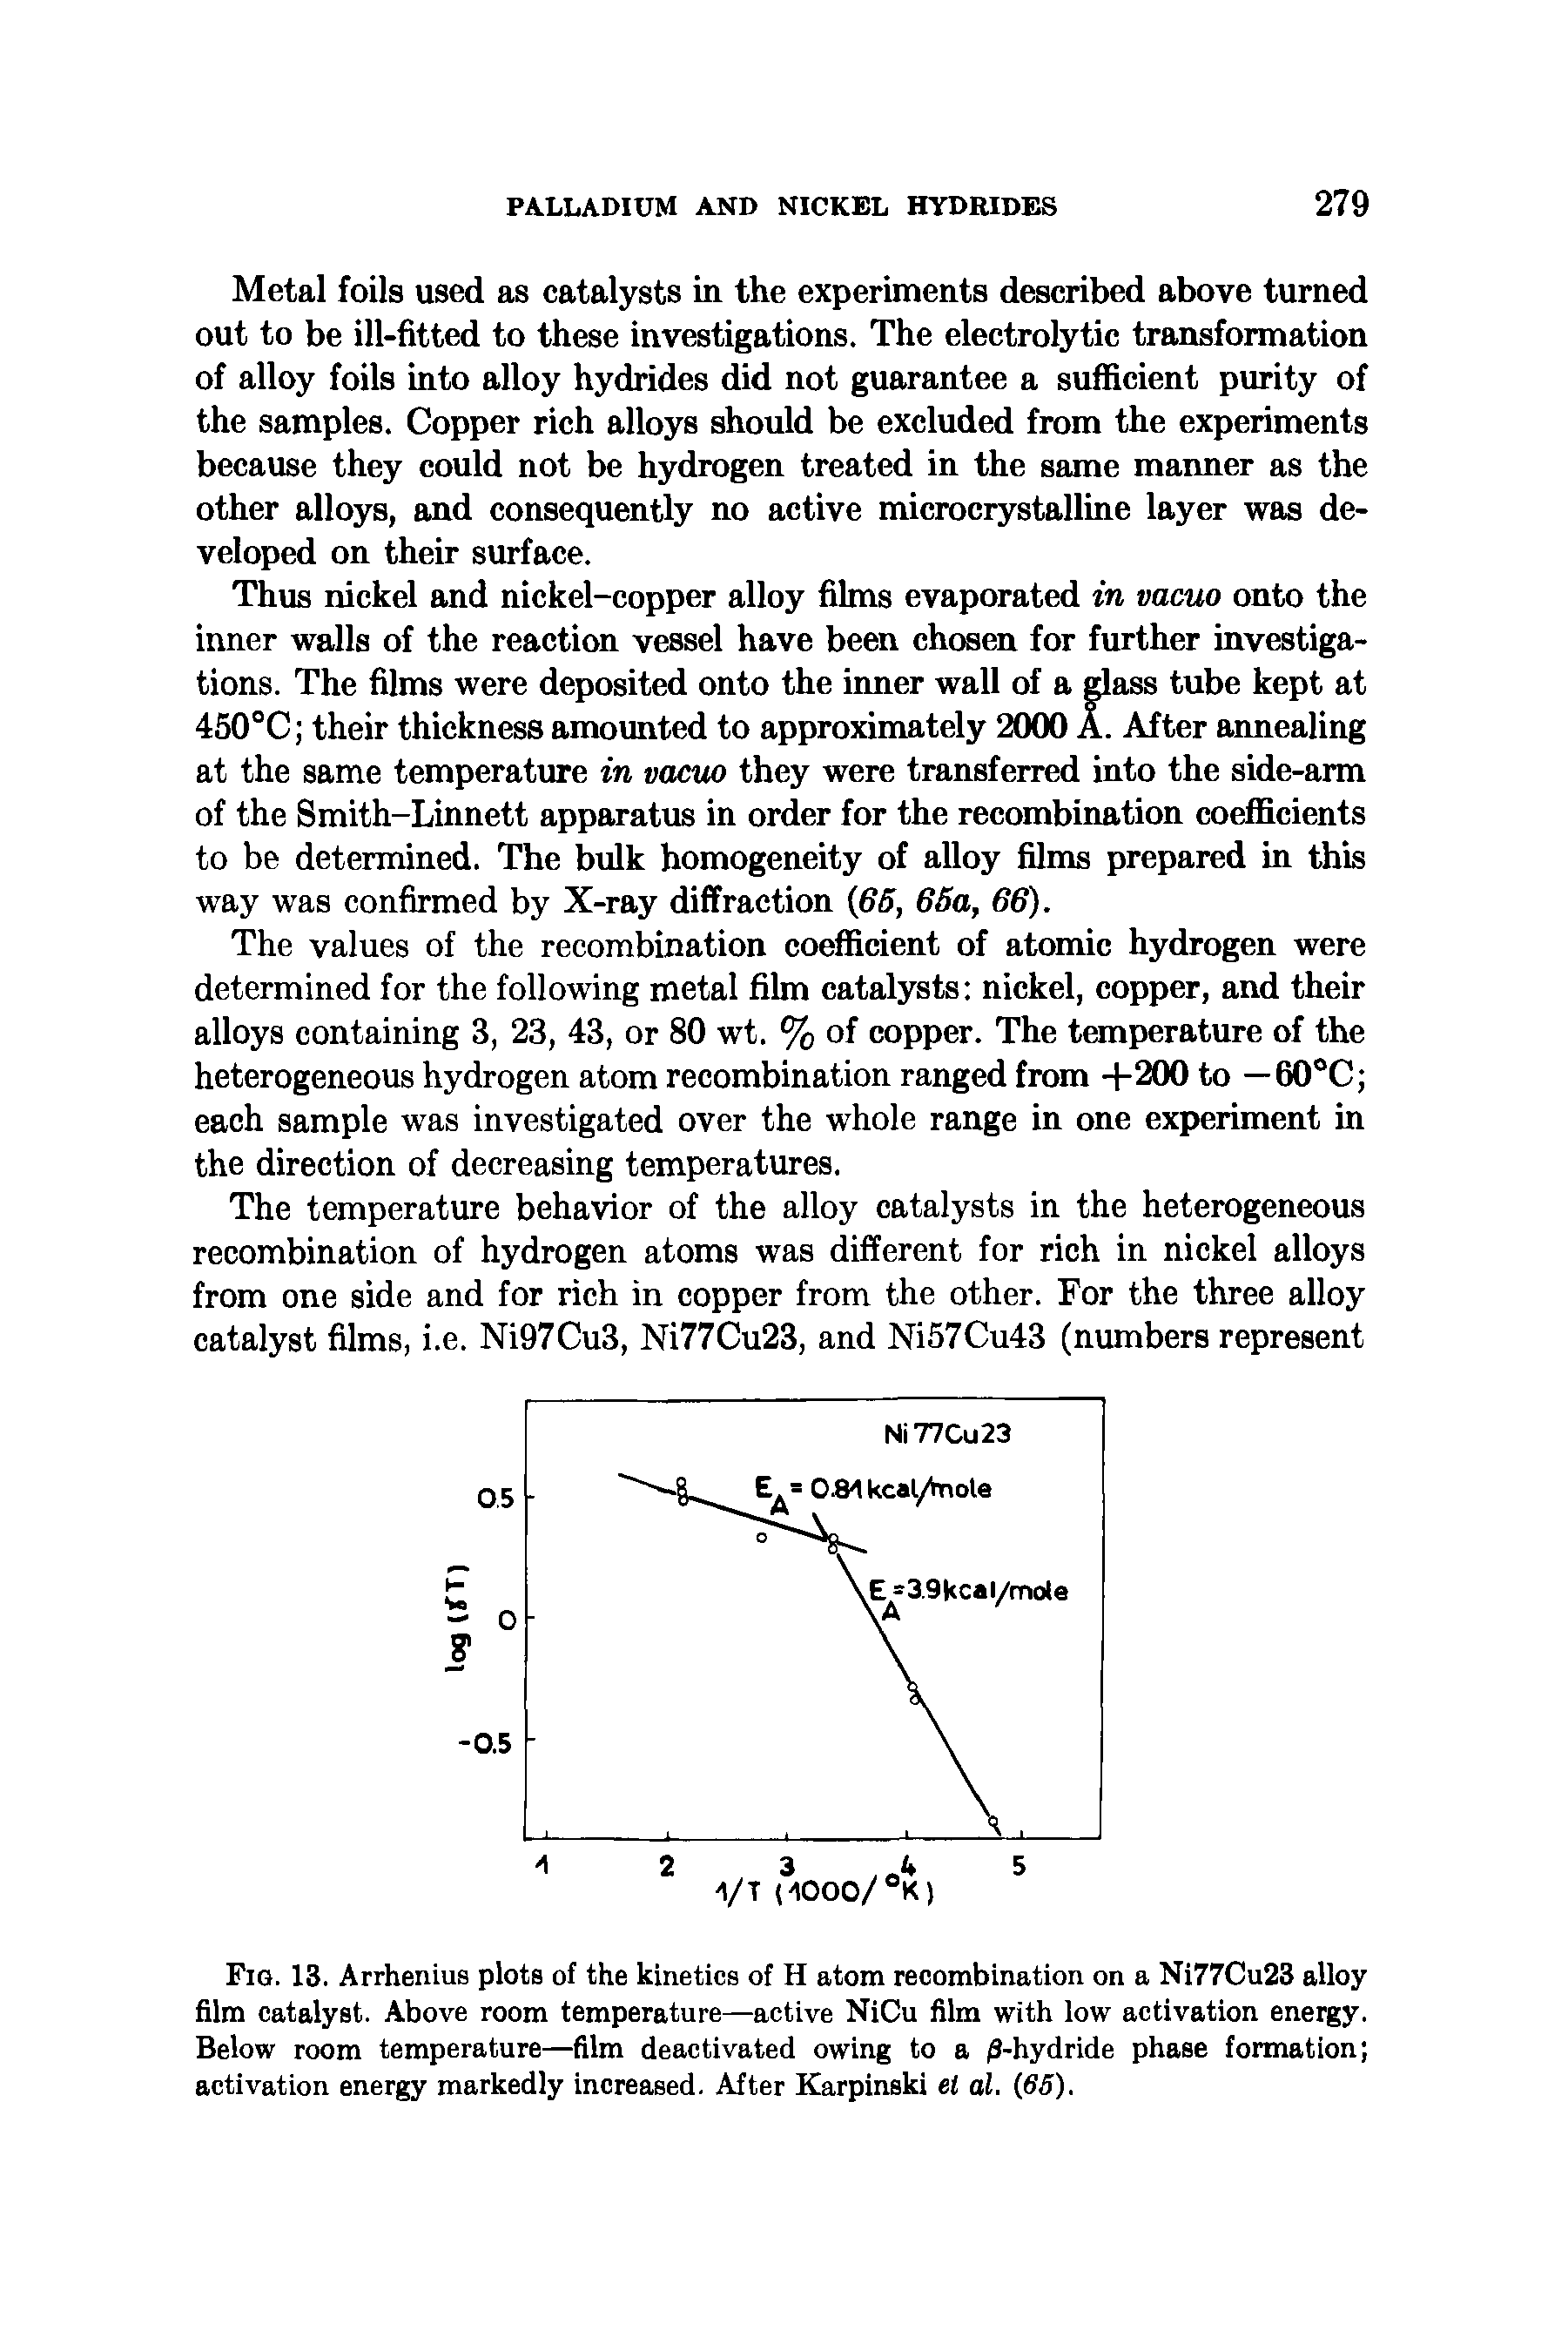 Fig. 13. Arrhenius plots of the kinetics of H atom recombination on a Ni77Cu23 alloy film catalyst. Above room temperature—active NiCu film with low activation energy. Below room temperature—film deactivated owing to a 0-hydride phase formation activation energy markedly increased. After Karpinski el al. (65).